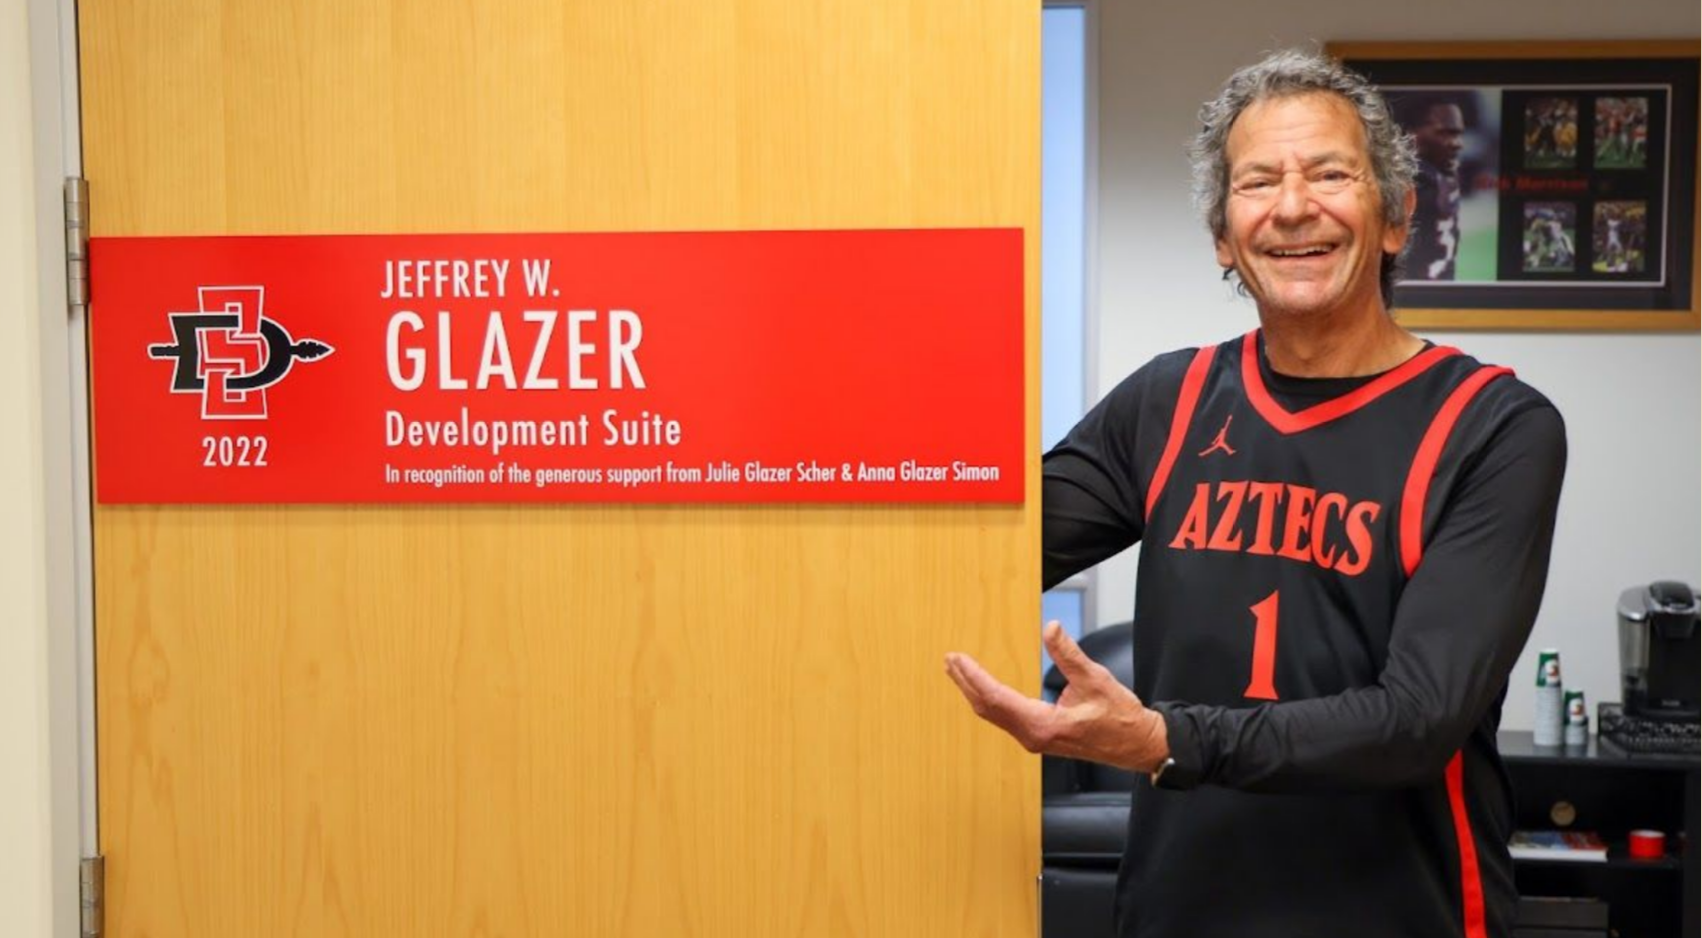 Jeff Glazer posed at the door to the Development Suite at Fowler Athletics Center named in his honor.